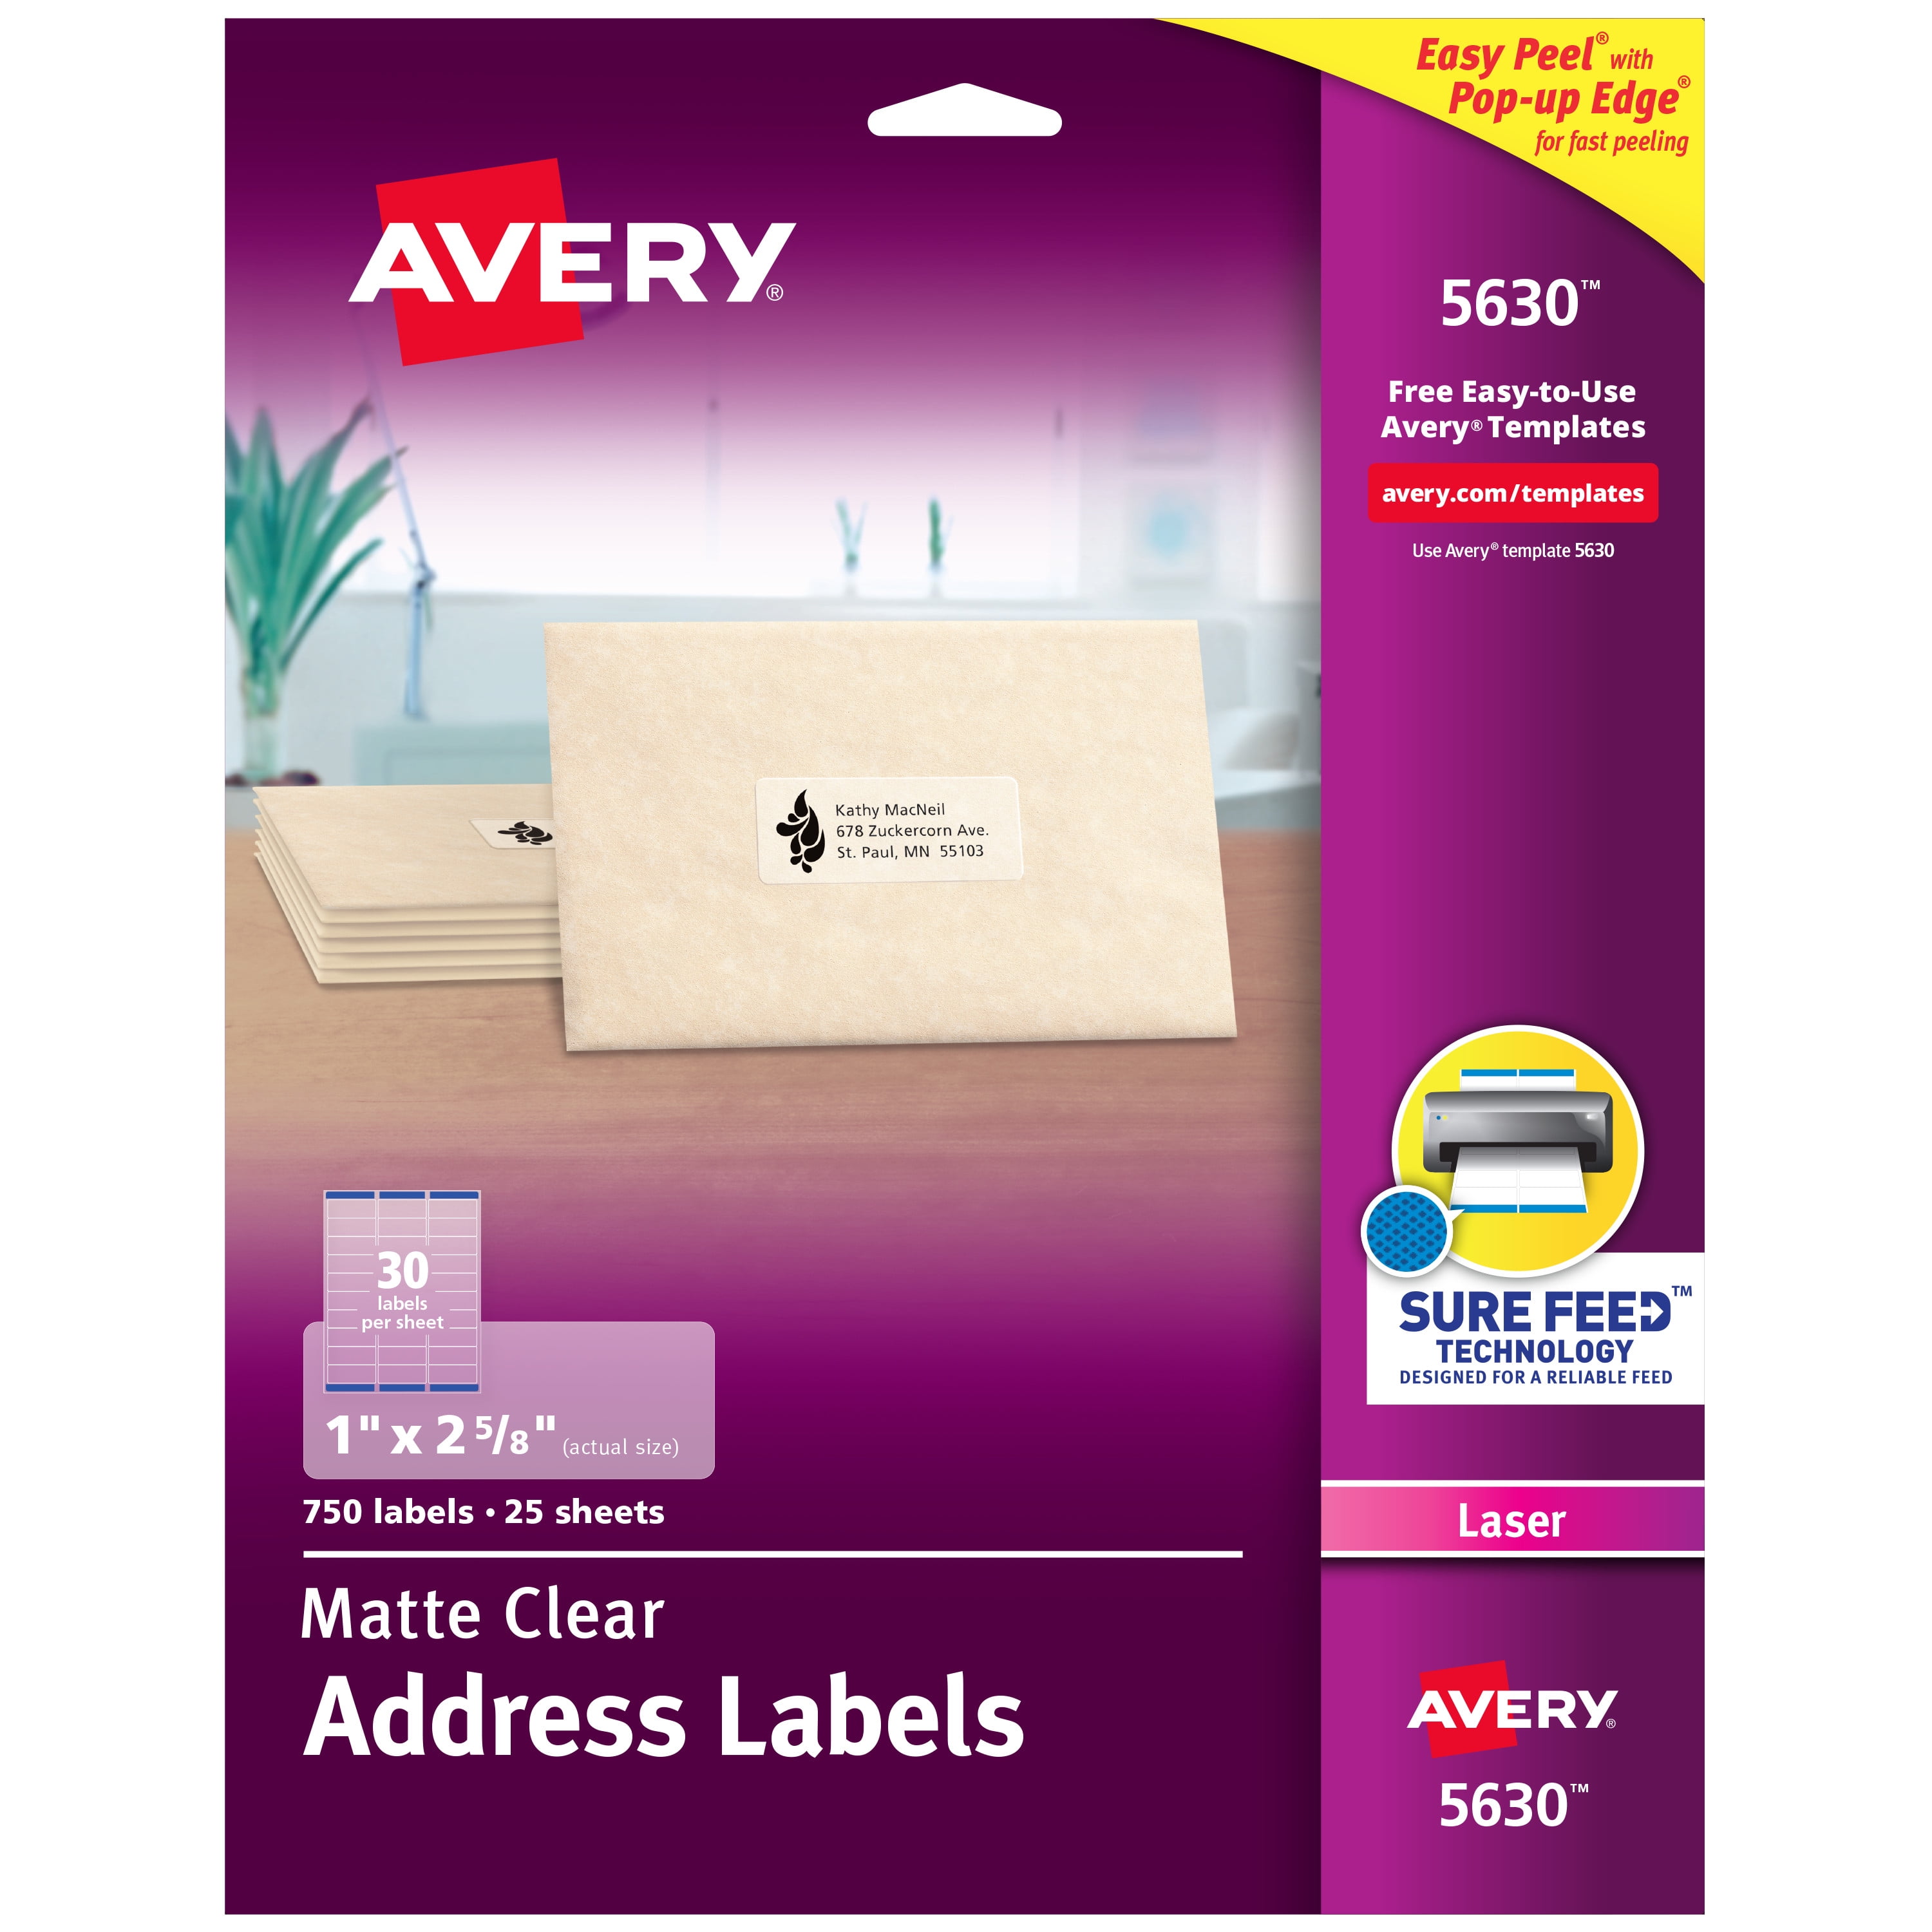 avery-matte-clear-address-labels-sure-feed-technology-laser-1-x-2-5